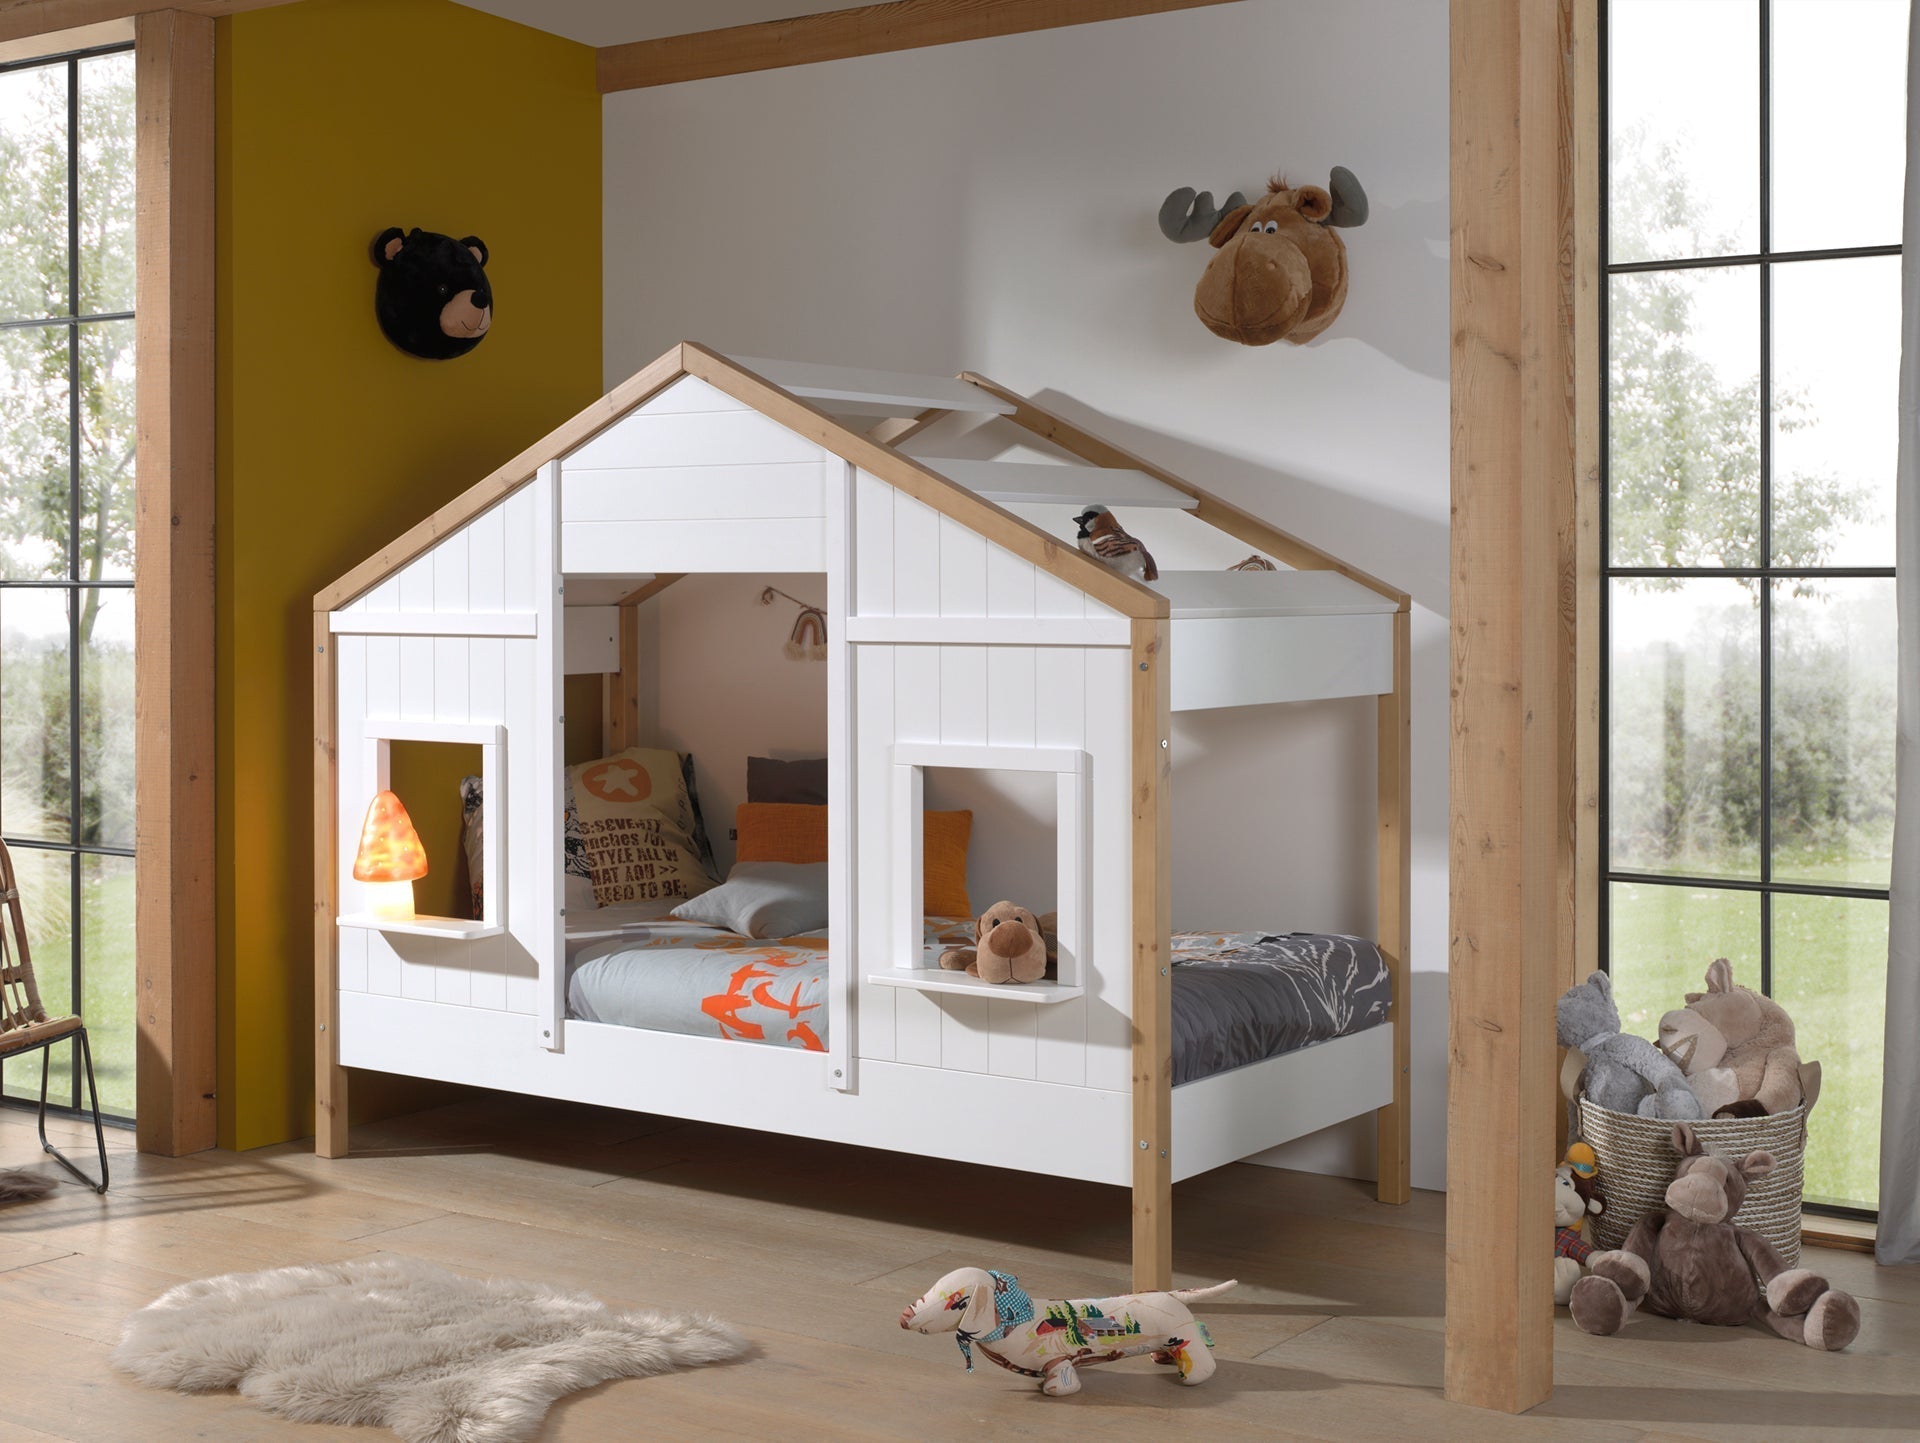 Vipack Babs Kids House Bed - White & Natural